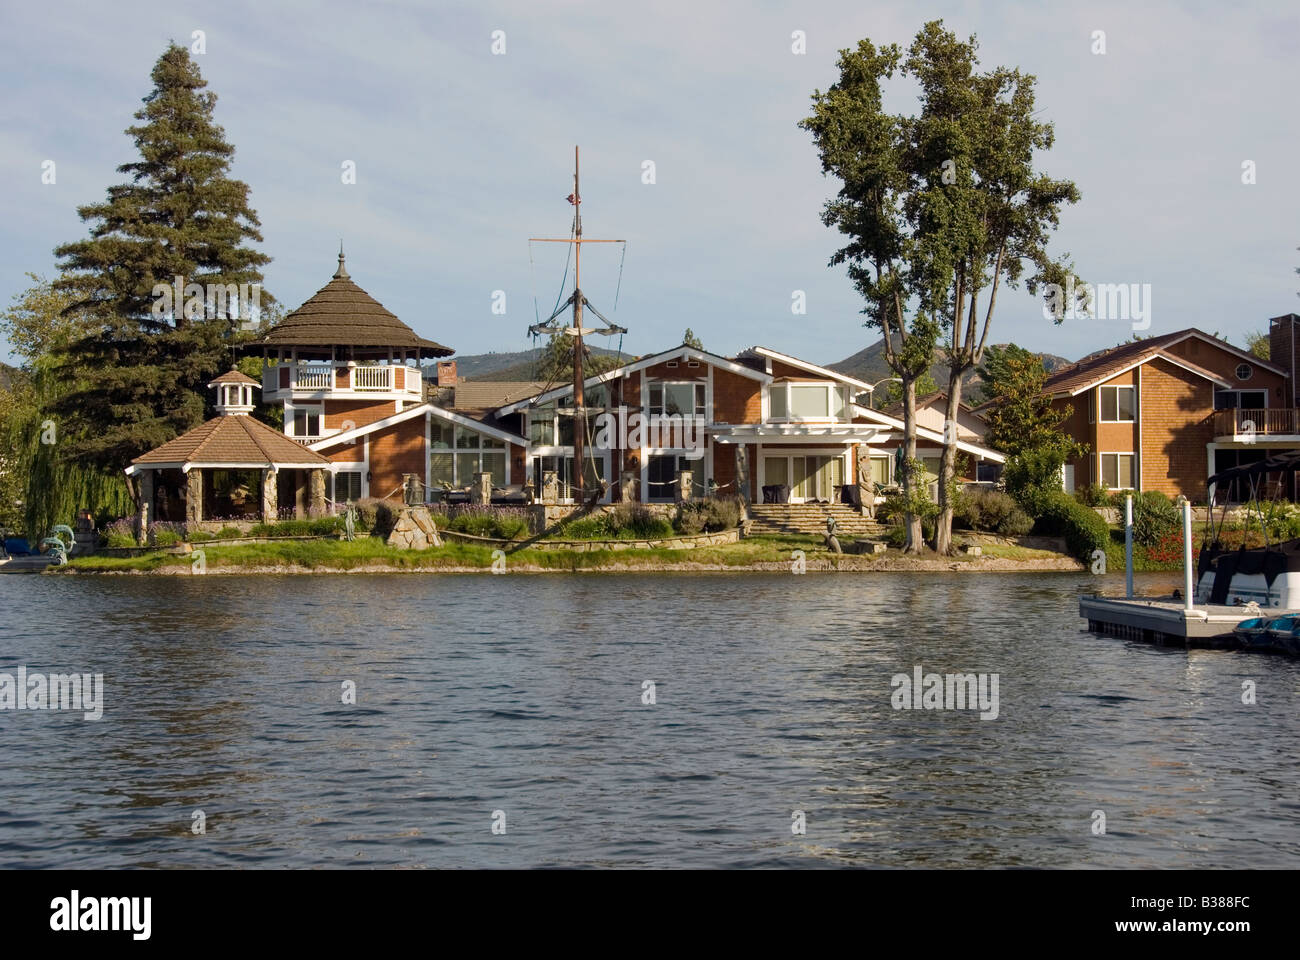 Exclusive community Houses, Homes along Lake in Westlake Village, los angeles county, California, elite and secluded city Stock Photo